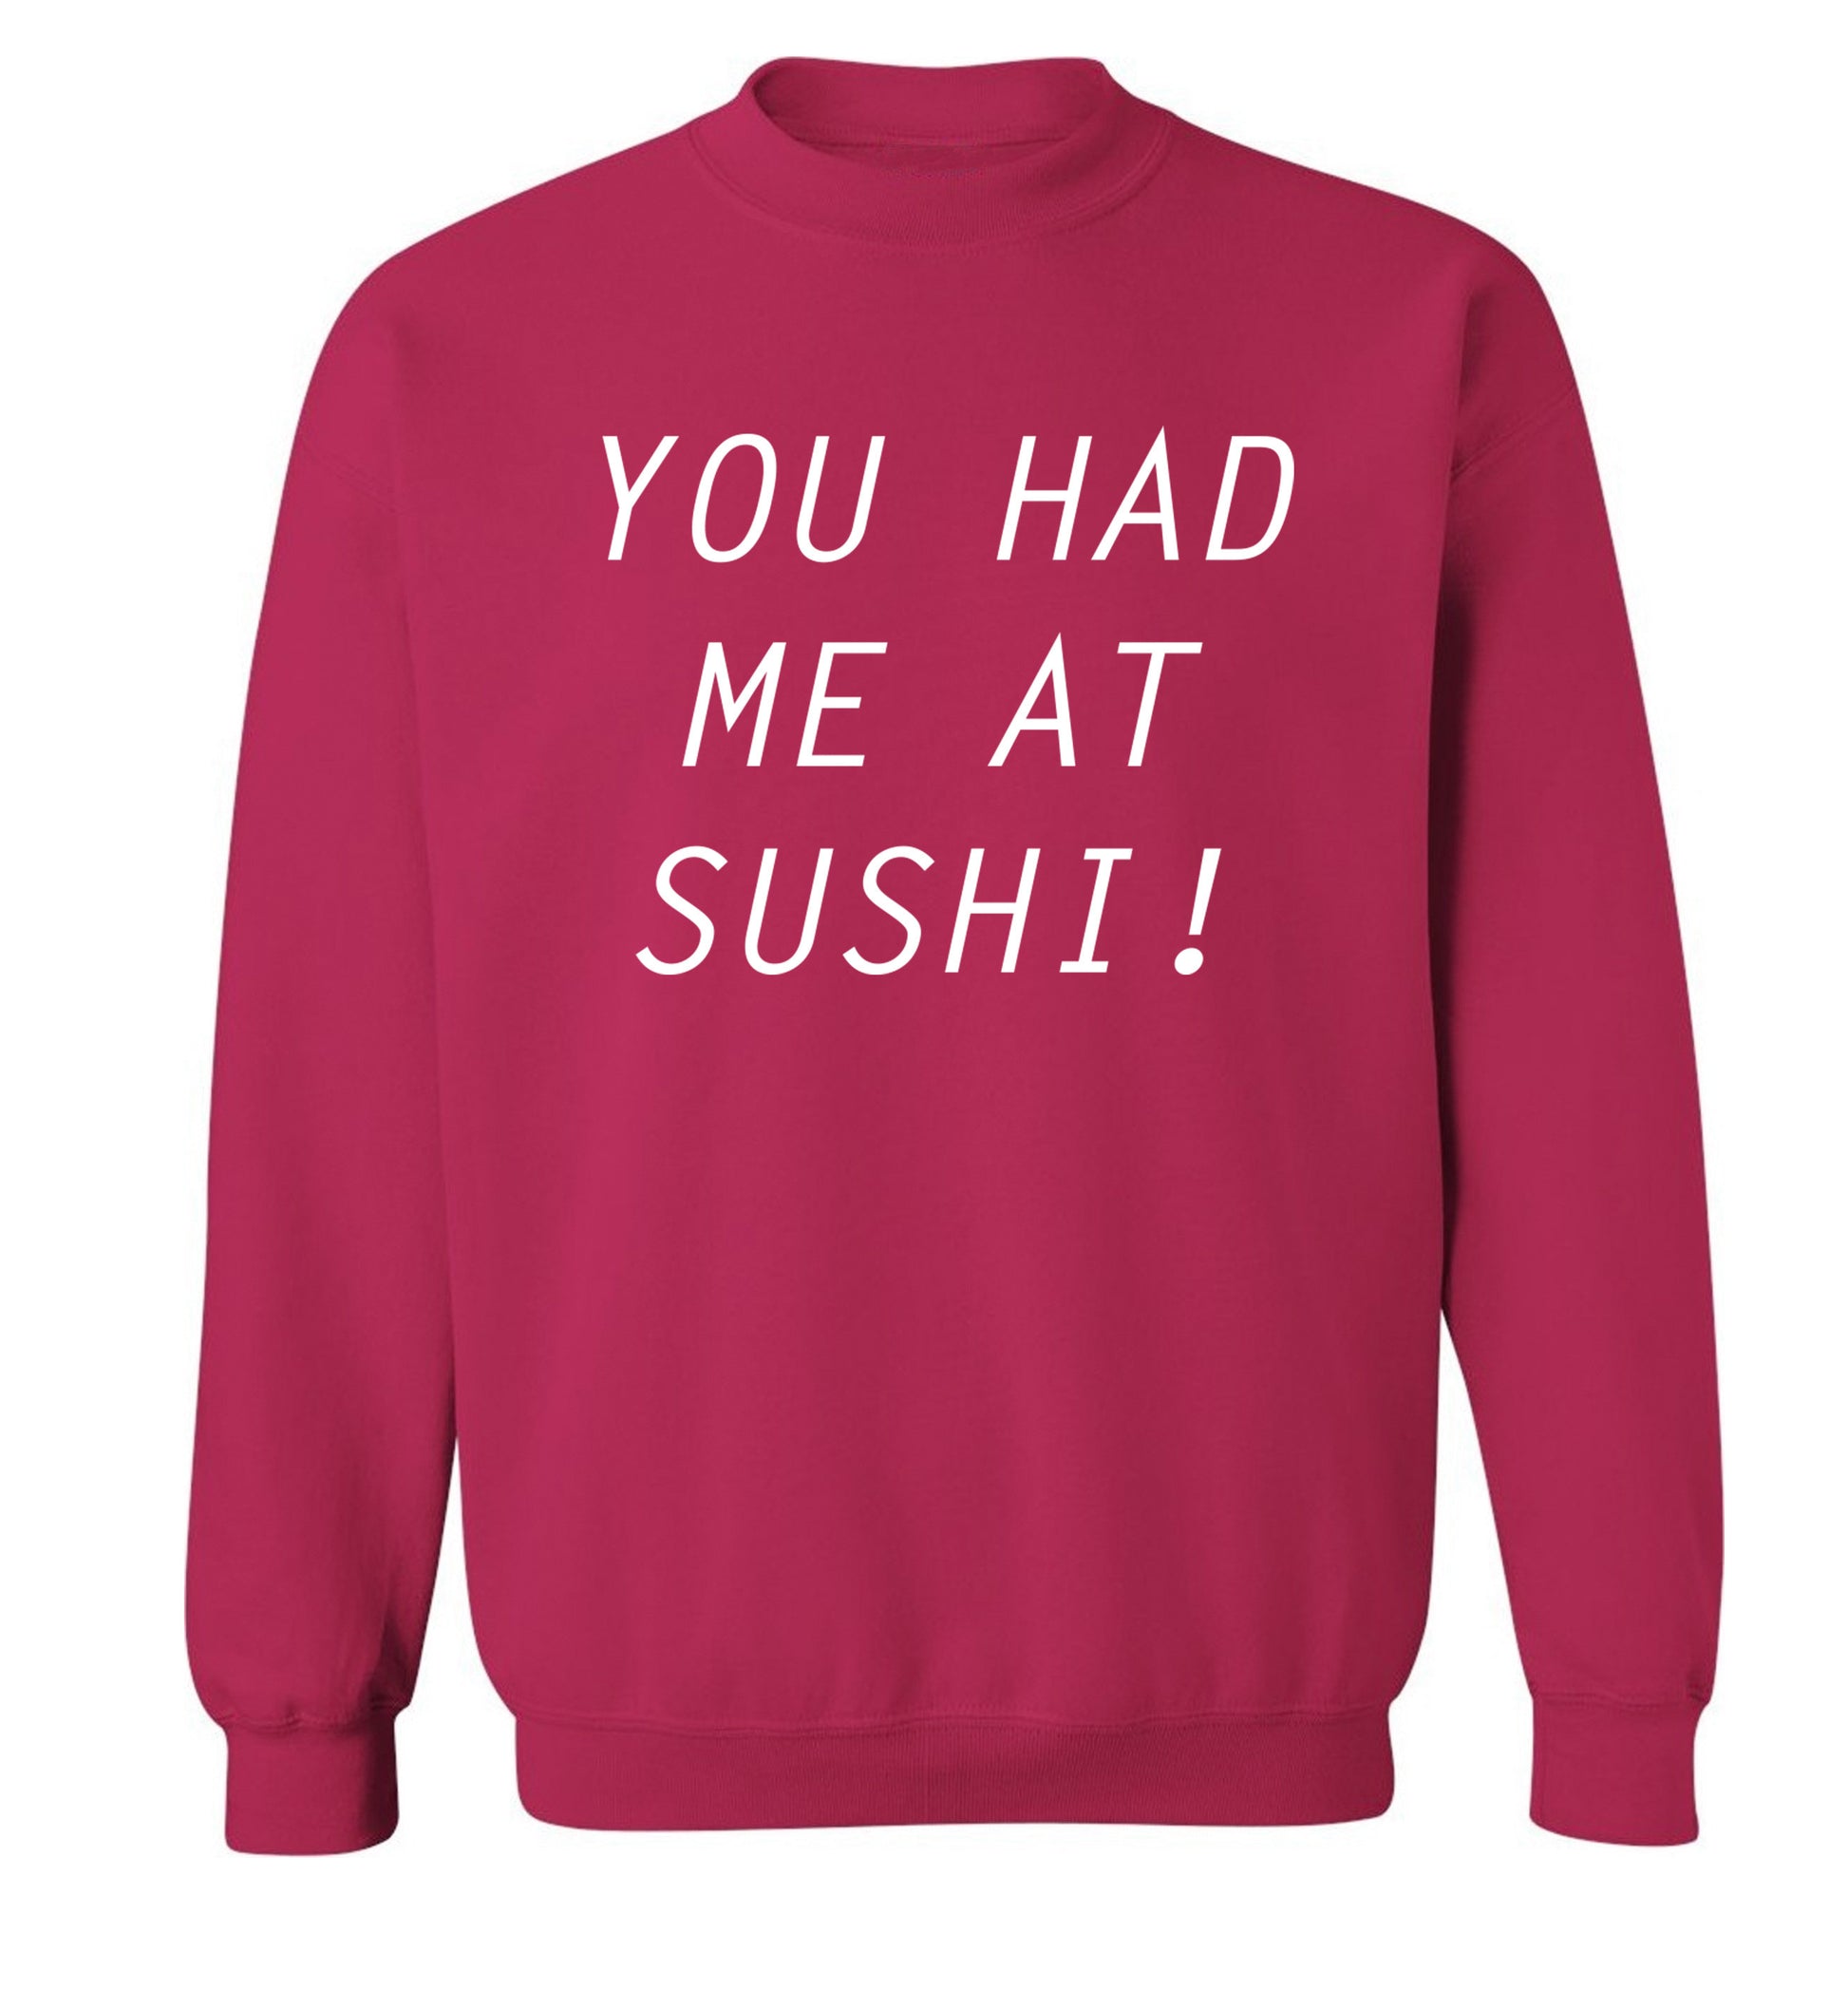 You had me at sushi Adult's unisex pink Sweater 2XL